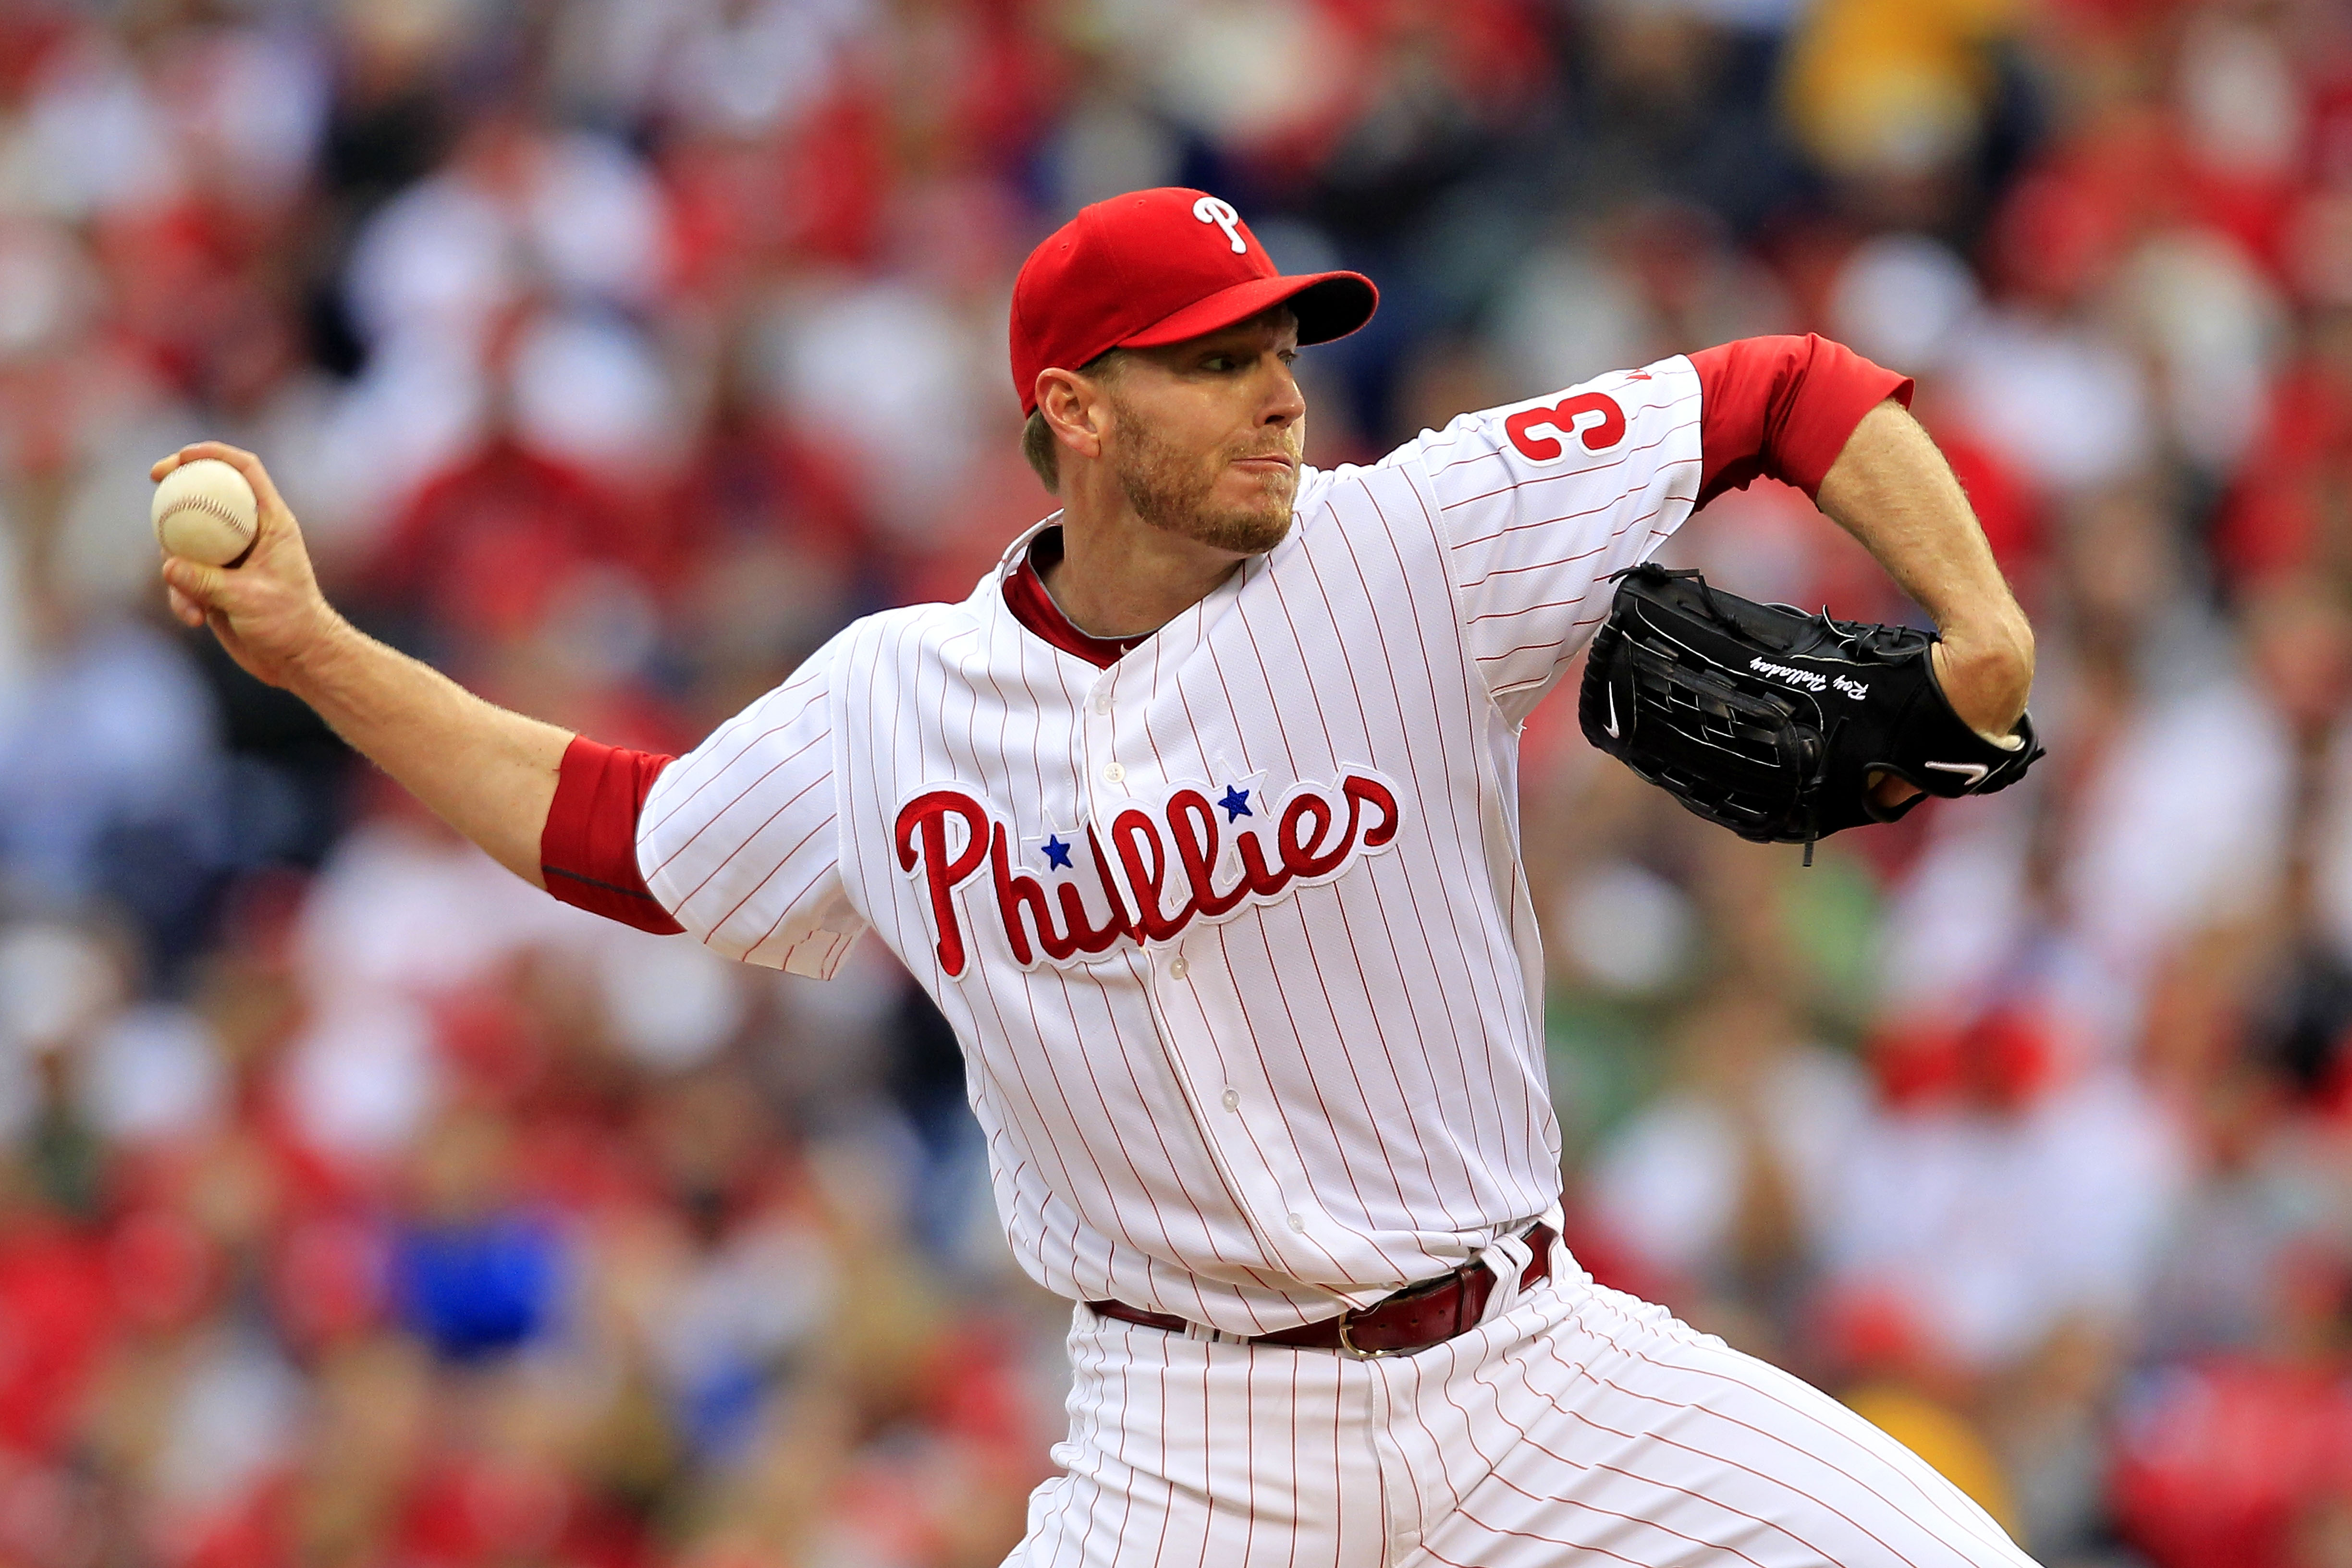 Phillies didn't offer Roy Oswalt arbitration, which matters for